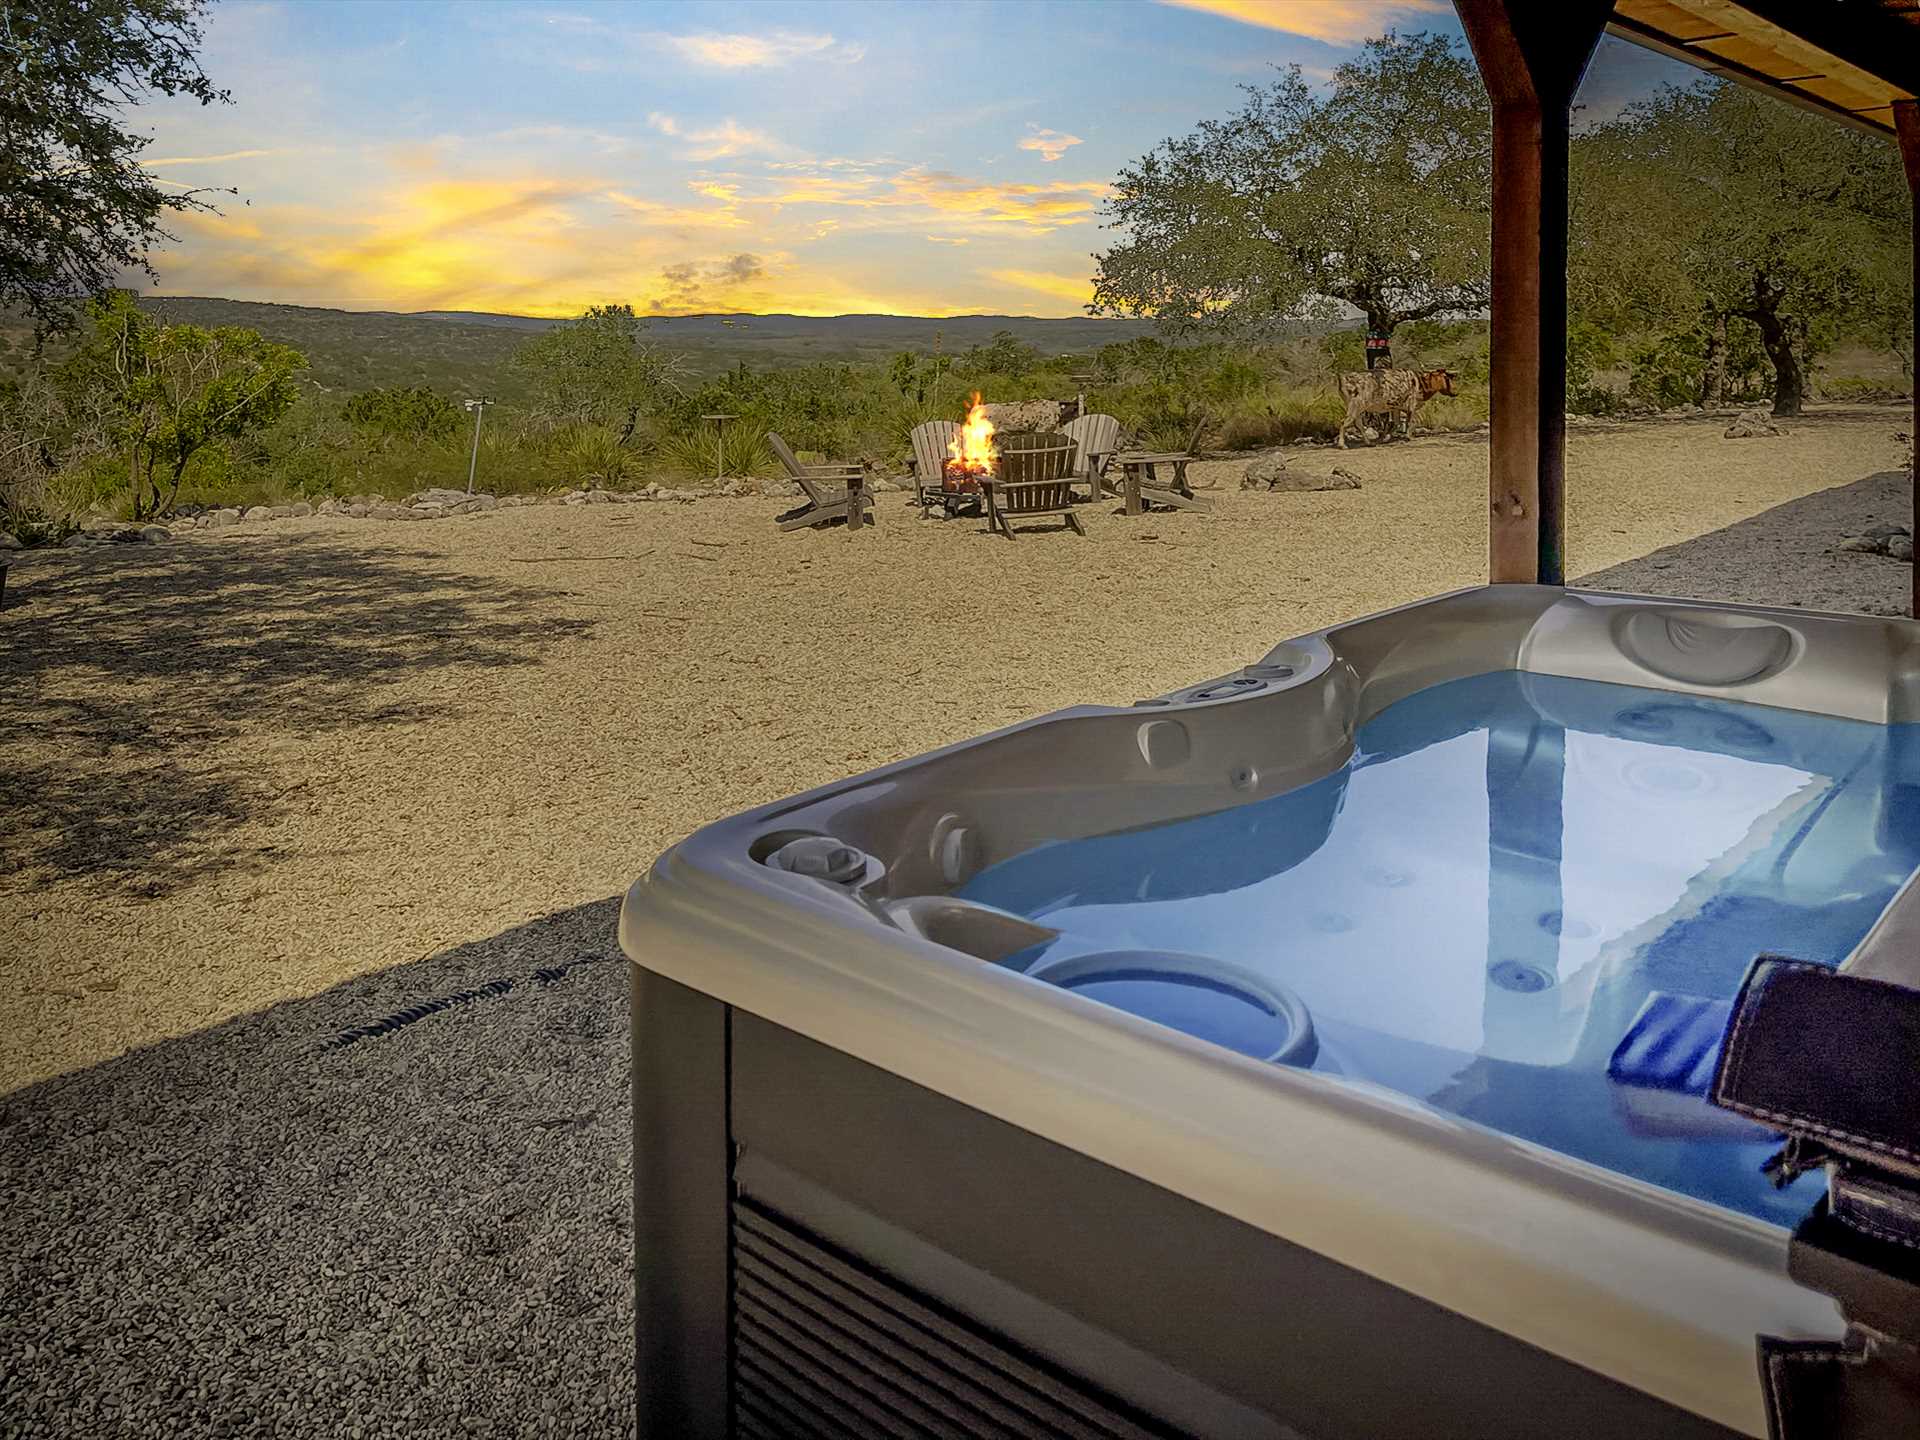                                                 The only thing that could make this Hill Country view even better is to enjoy it from a warm and soothing hot tub!